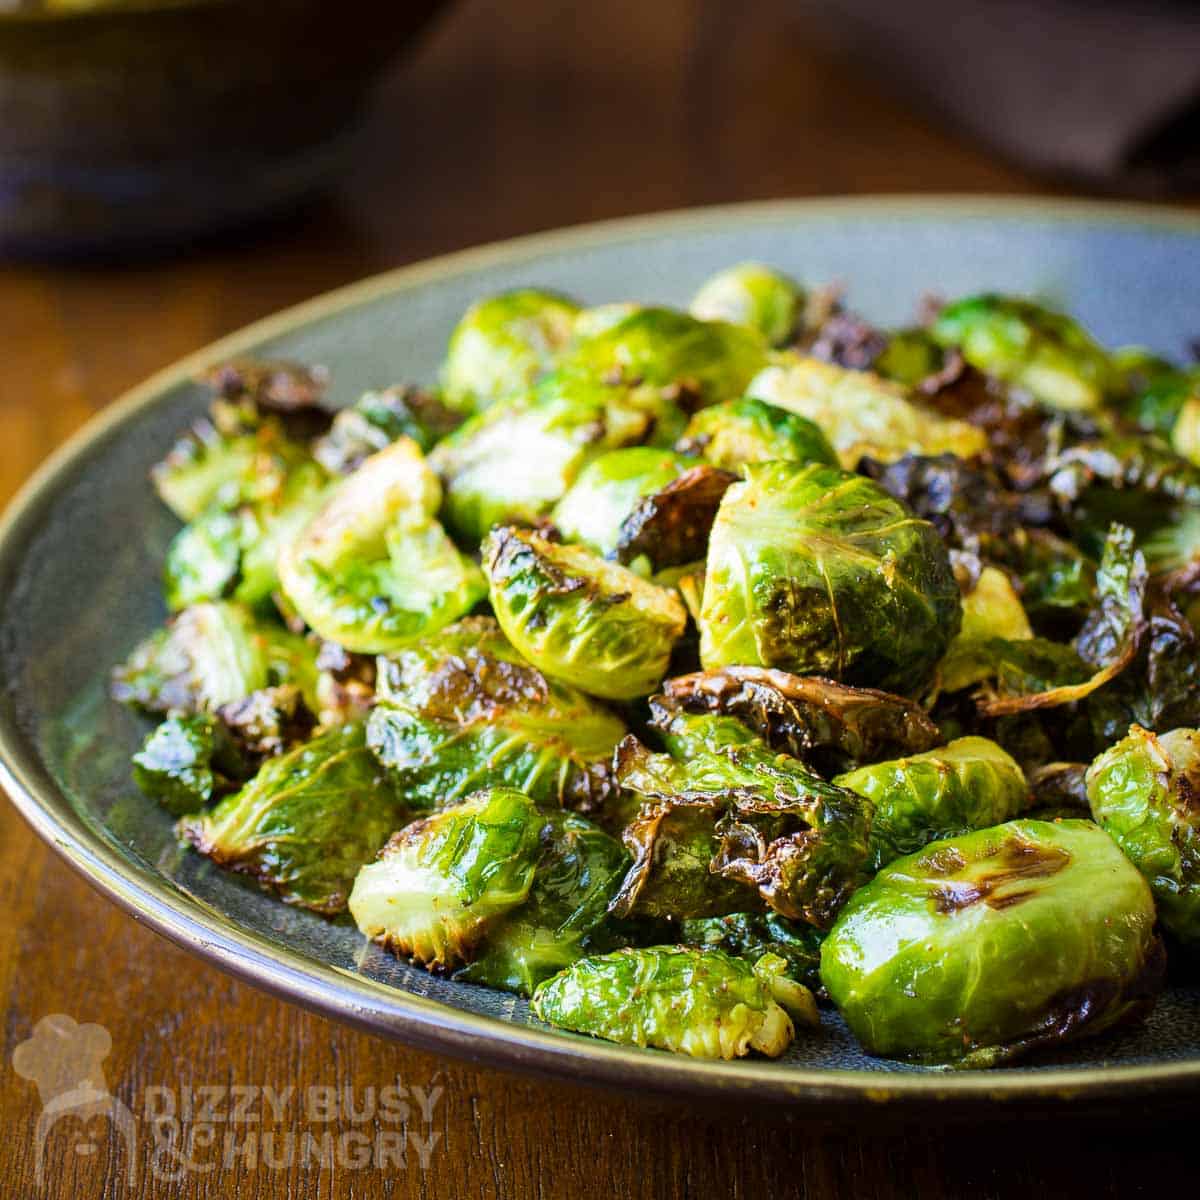 Roasted Brussels Sprouts with Garlic